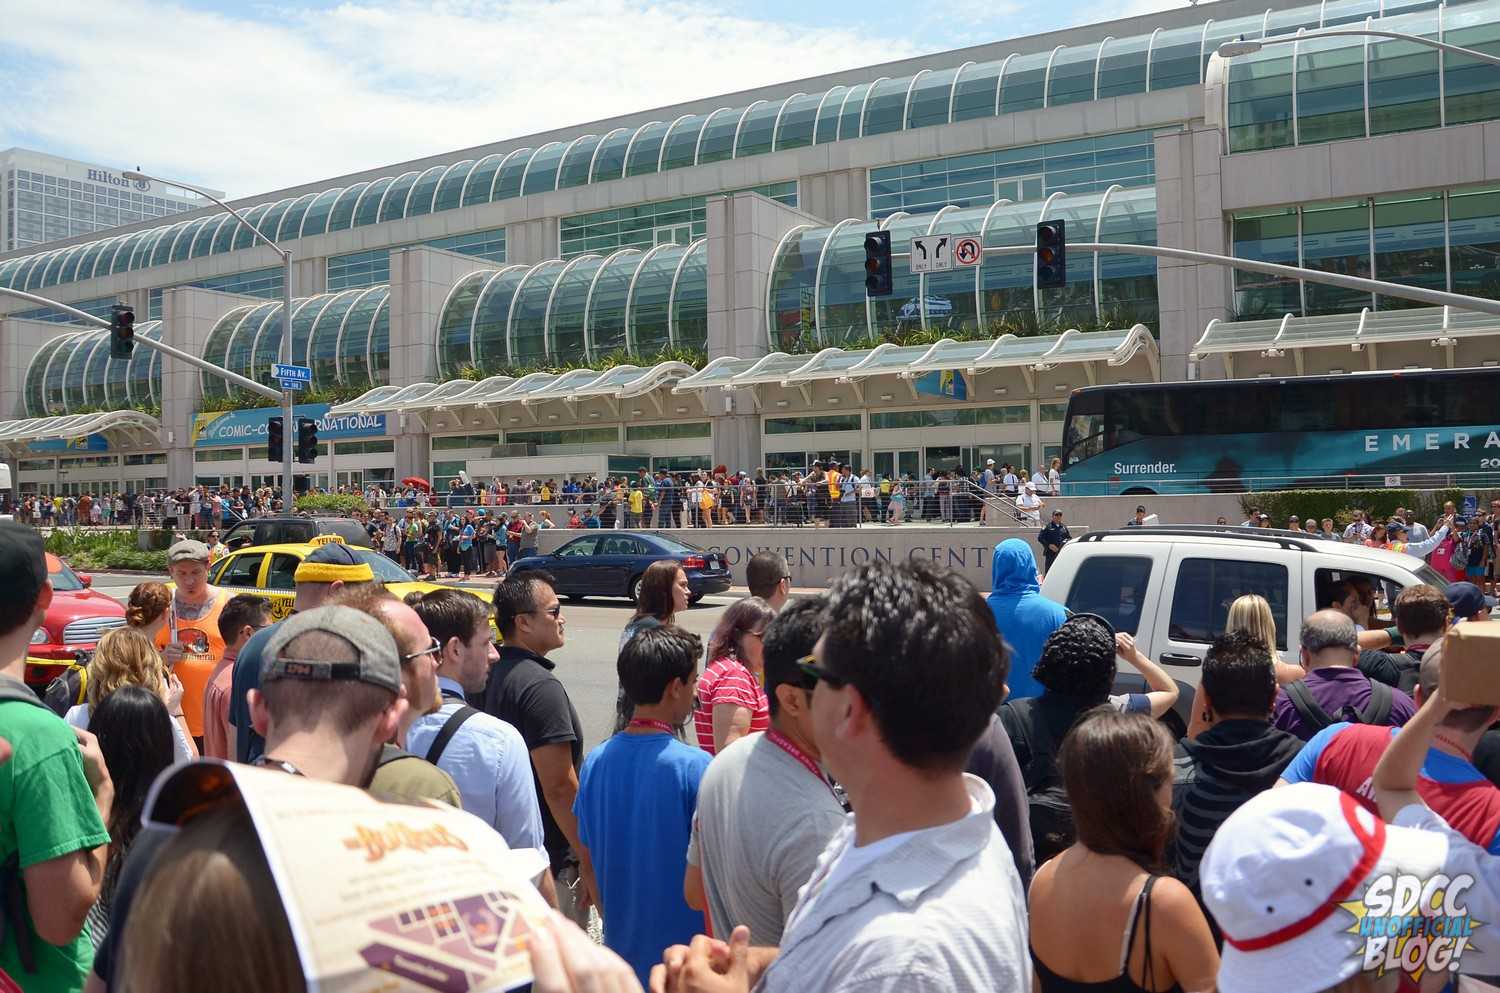 Outside Convention Center Front Crowd View - SDCC 2014 Friday